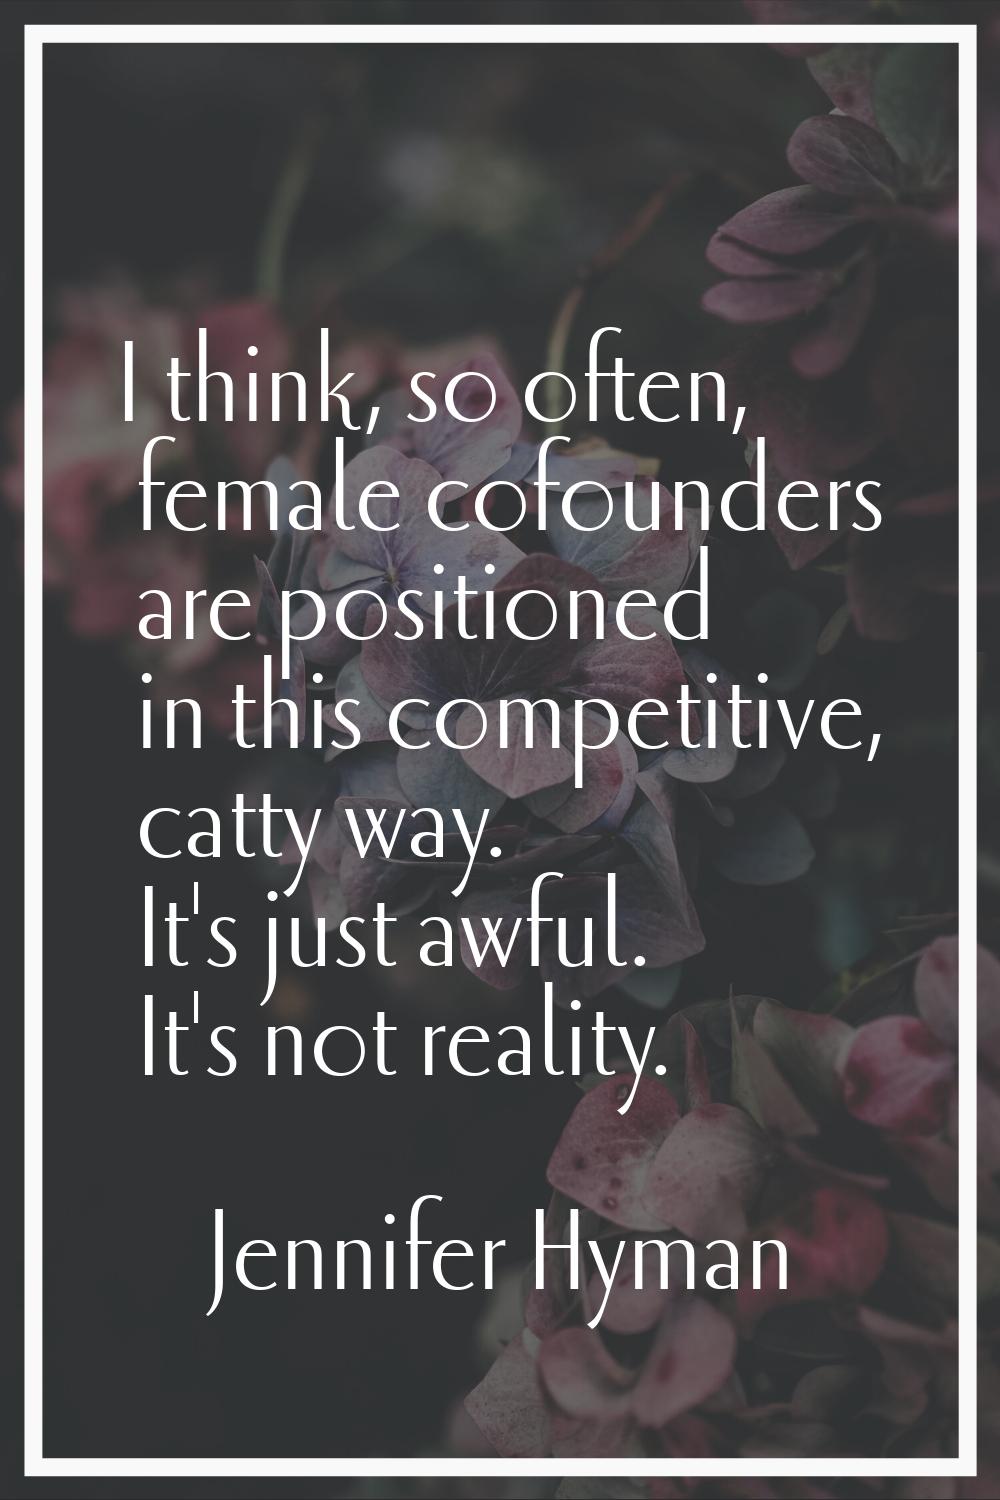 I think, so often, female cofounders are positioned in this competitive, catty way. It's just awful